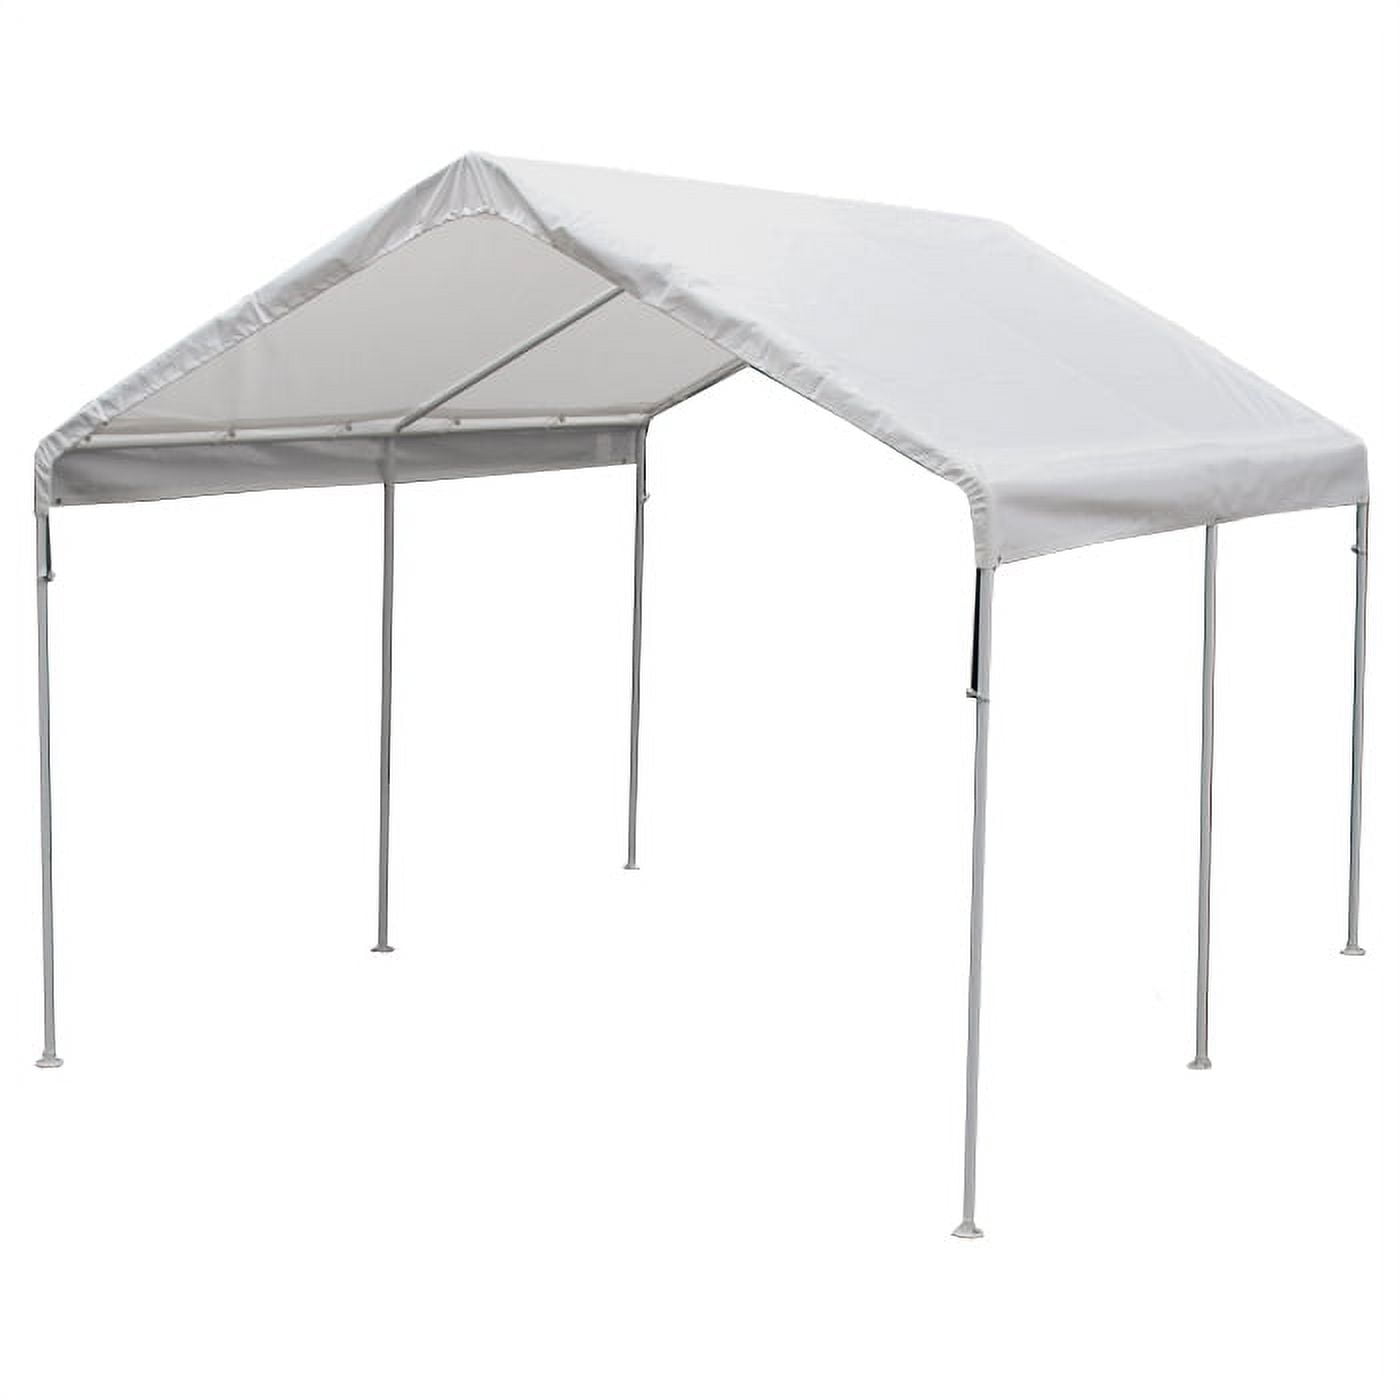 King Canopy Universal 6 Leg 10x13 Canopy W White Cover